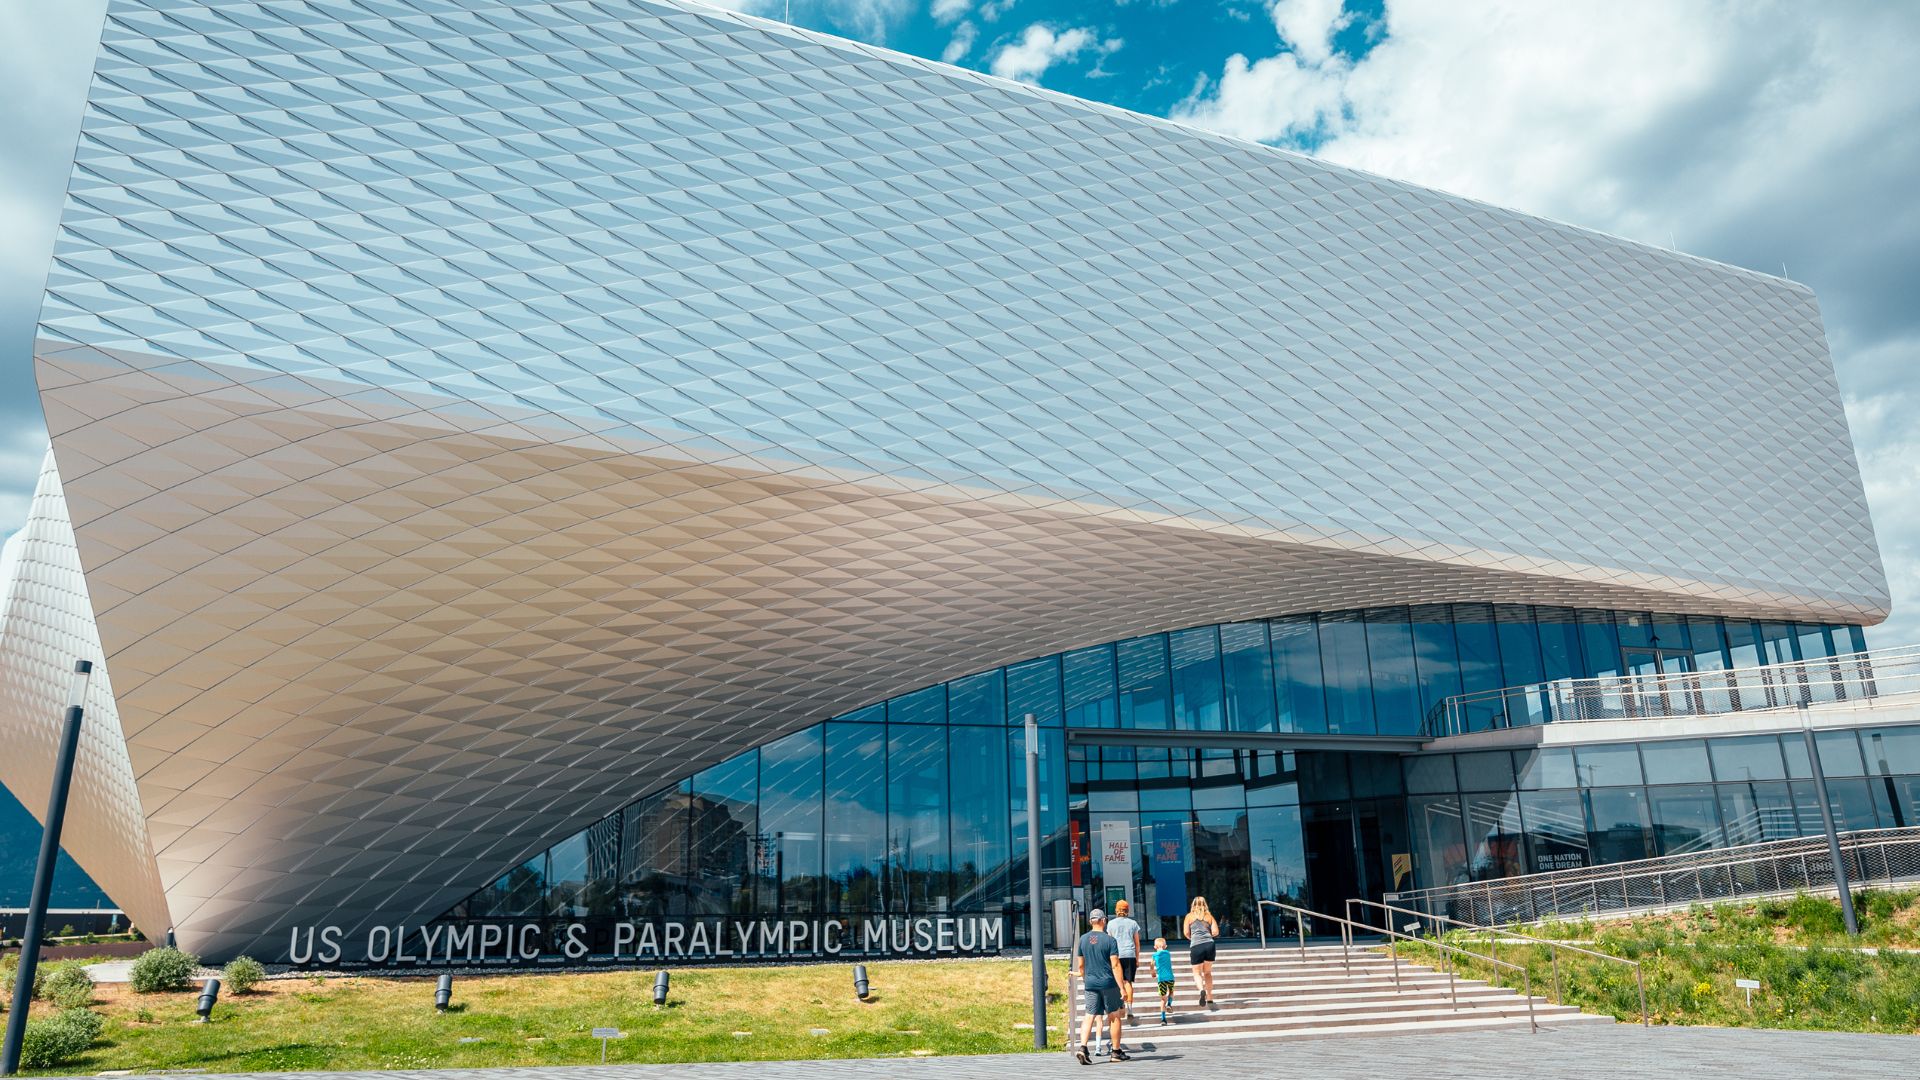 Purchase tickets to the U.S. Olympic & Paralympic Museum